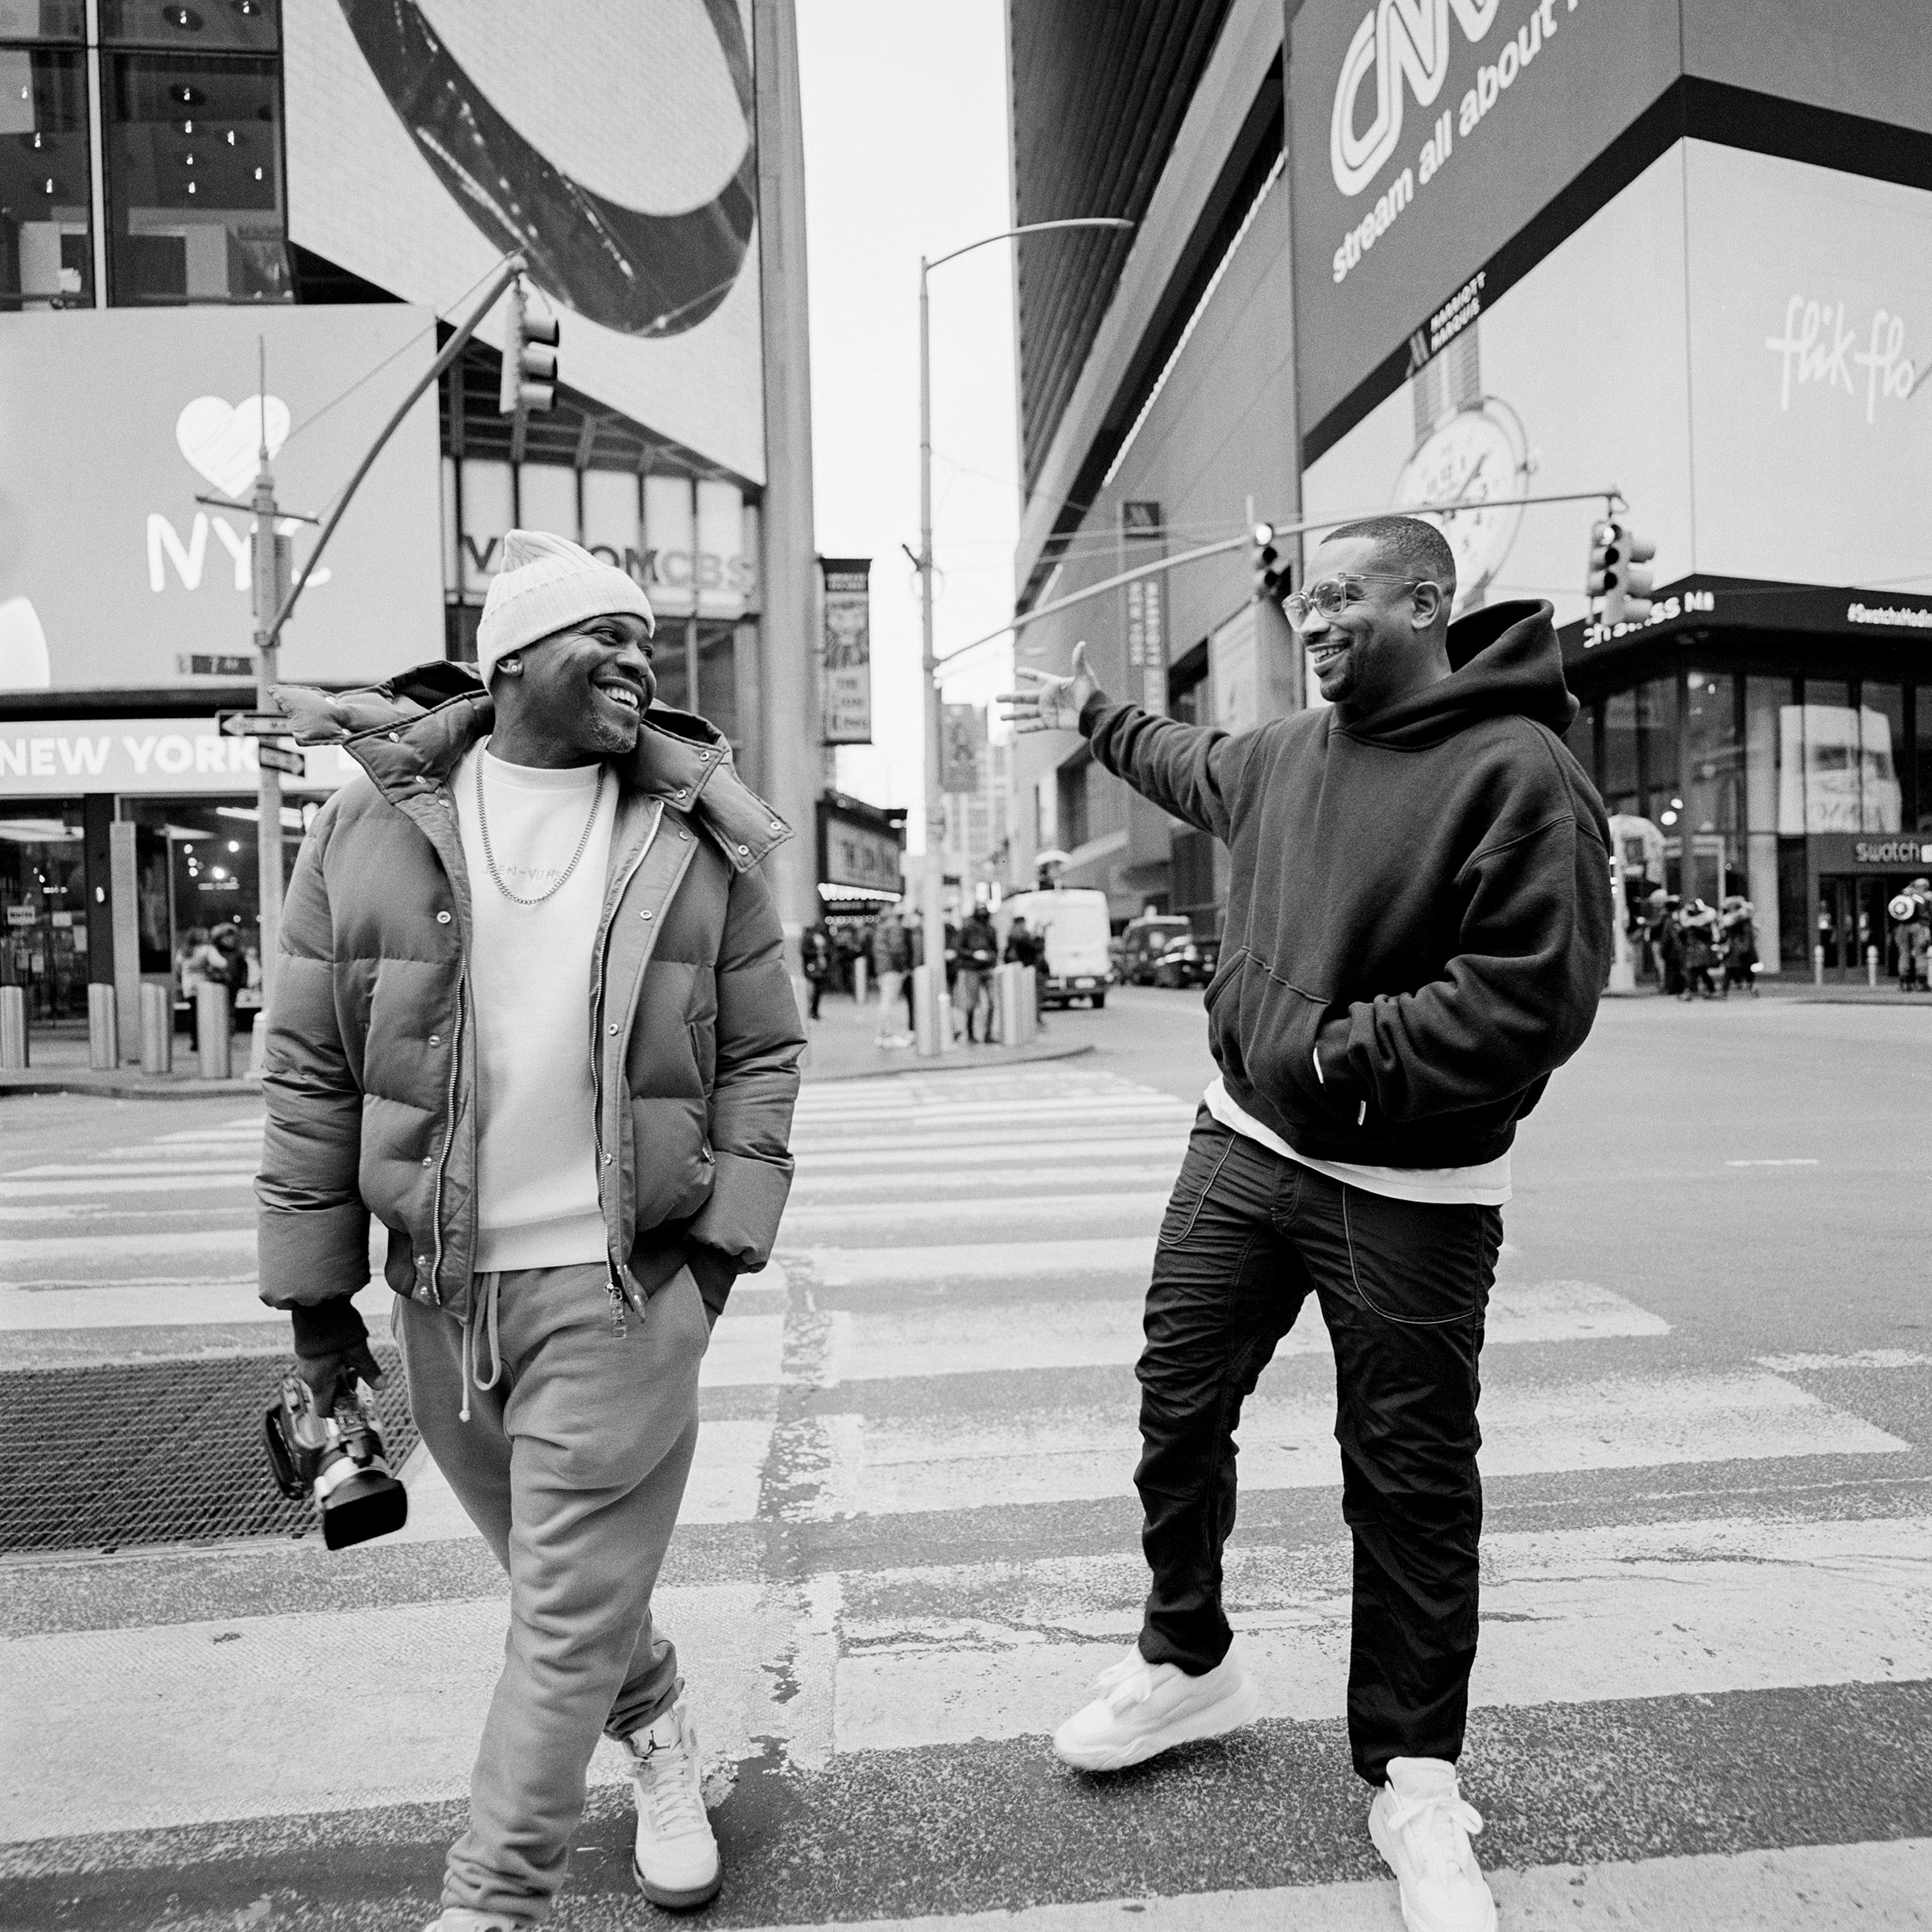 <strong>Filmmakers Coodie &amp; Chike.</strong> "<a href="https://time.com/6144389/kanye-west-jeen-yuhs-documentary-behind-the-scenes/">The Inside Story Behind the Kanye Docuseries Two Decades in the Making,</a>" February 14 issue. (Andre D. Wagner for TIME)